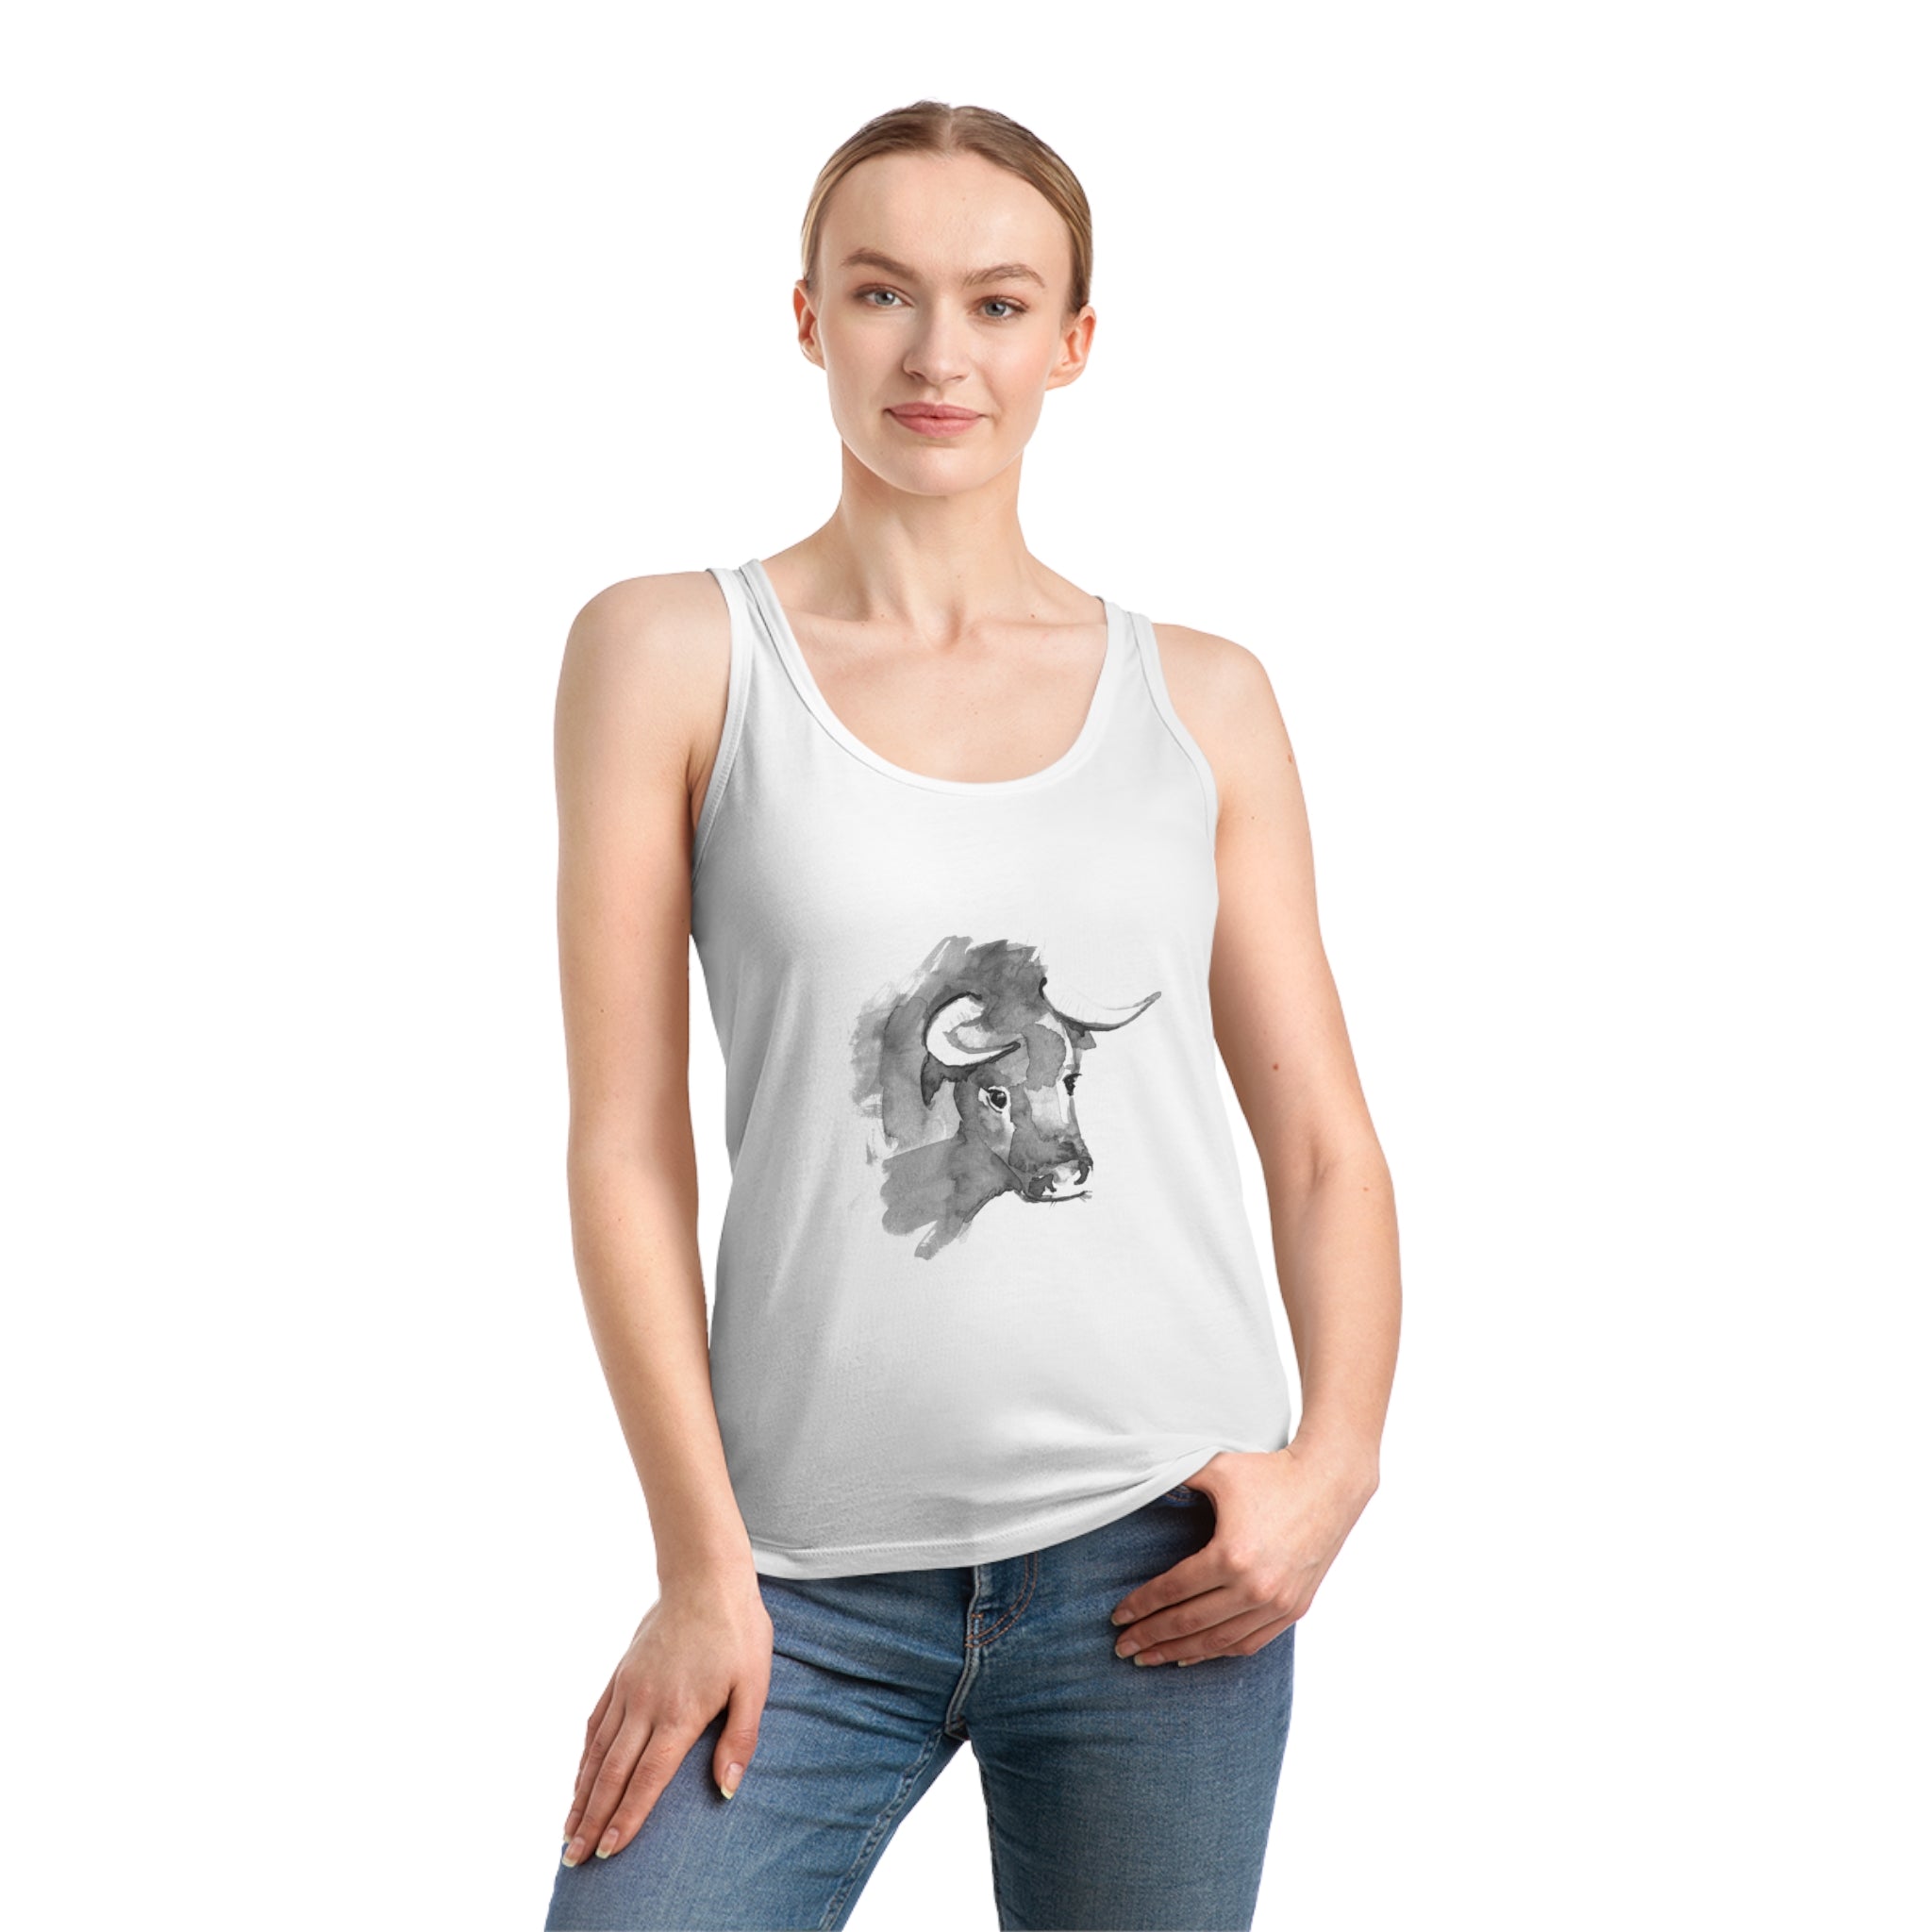 An Ox Women's Dreamer Tank Top with an image of a woman riding a horse.